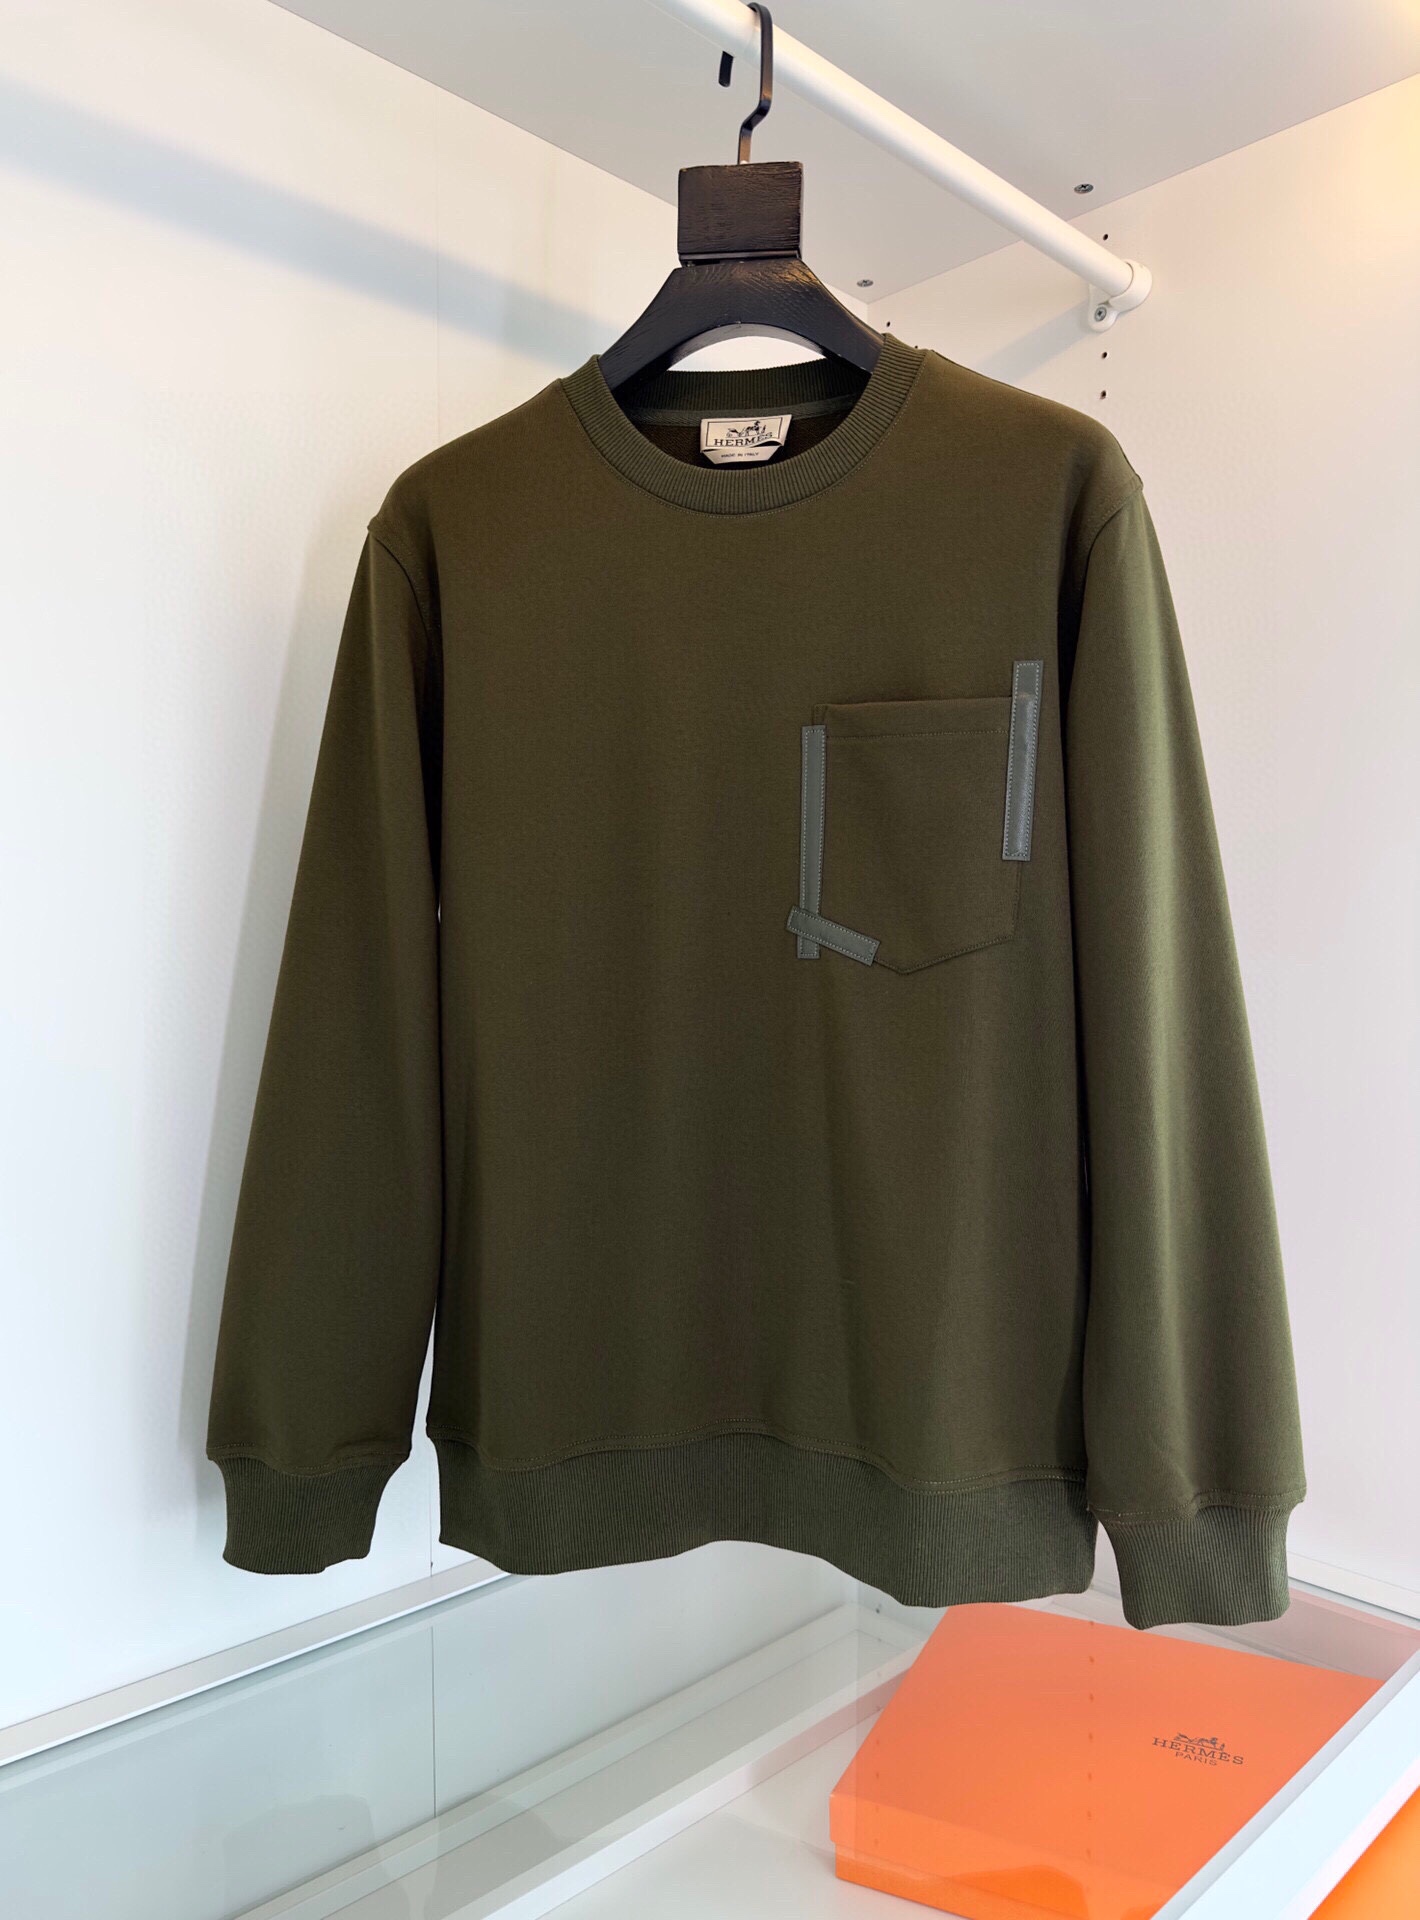 Hermes Clothing Sweatshirts Designer Fake
 Black Green Orange White Combed Cotton Fall Collection Casual P5205235